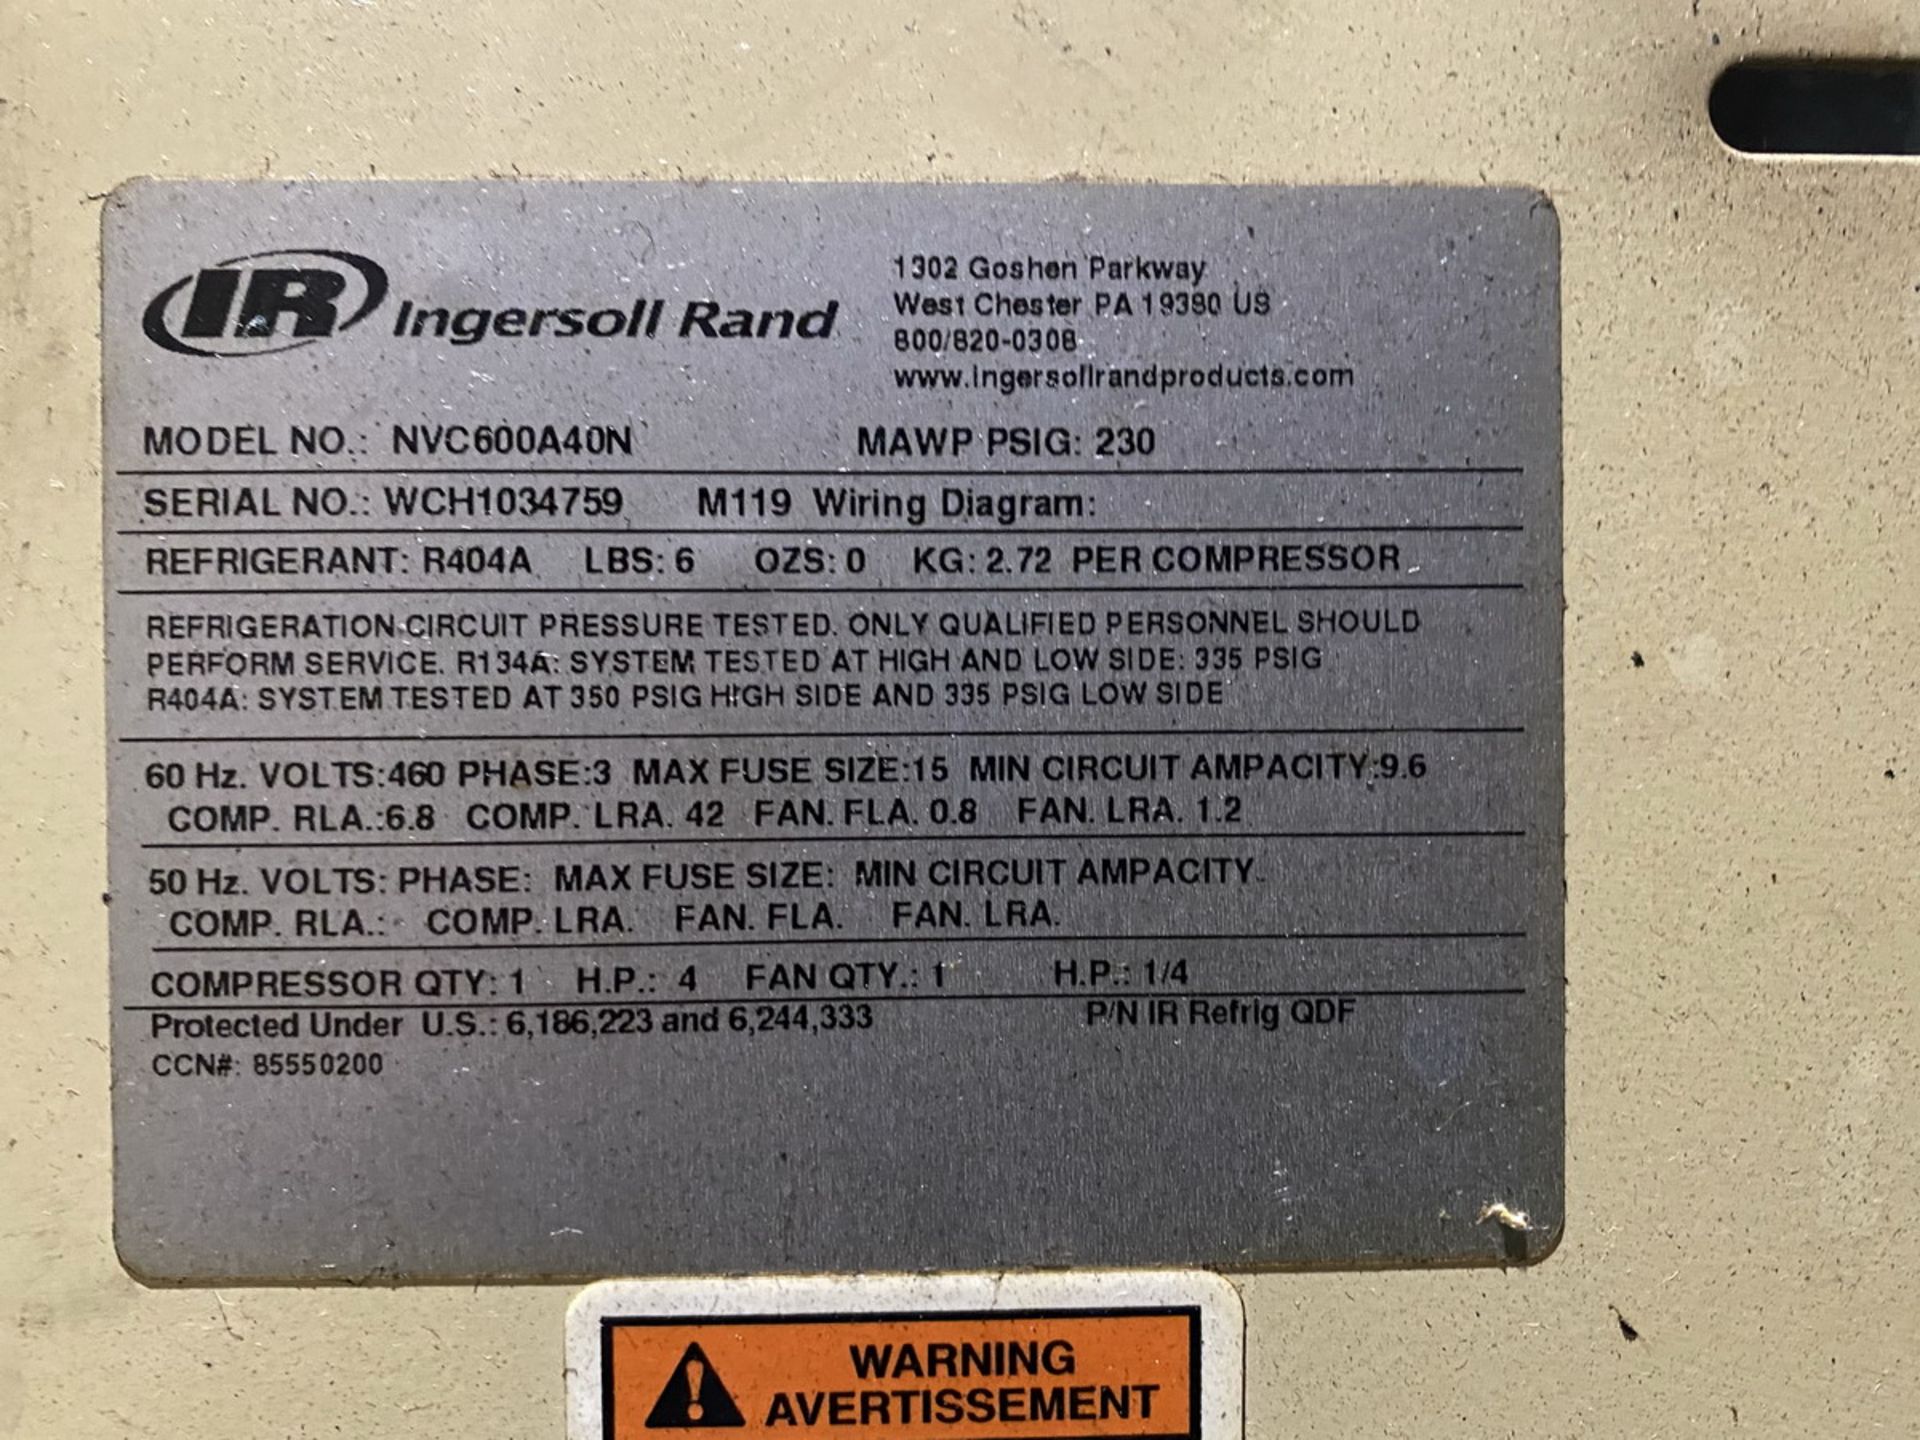 Ingersoll-Rand Model NVC600A40N Refrigerated Air Dryer, S/N: WCH10347549; Rated at 230 MAWP PSIG, - Image 4 of 4